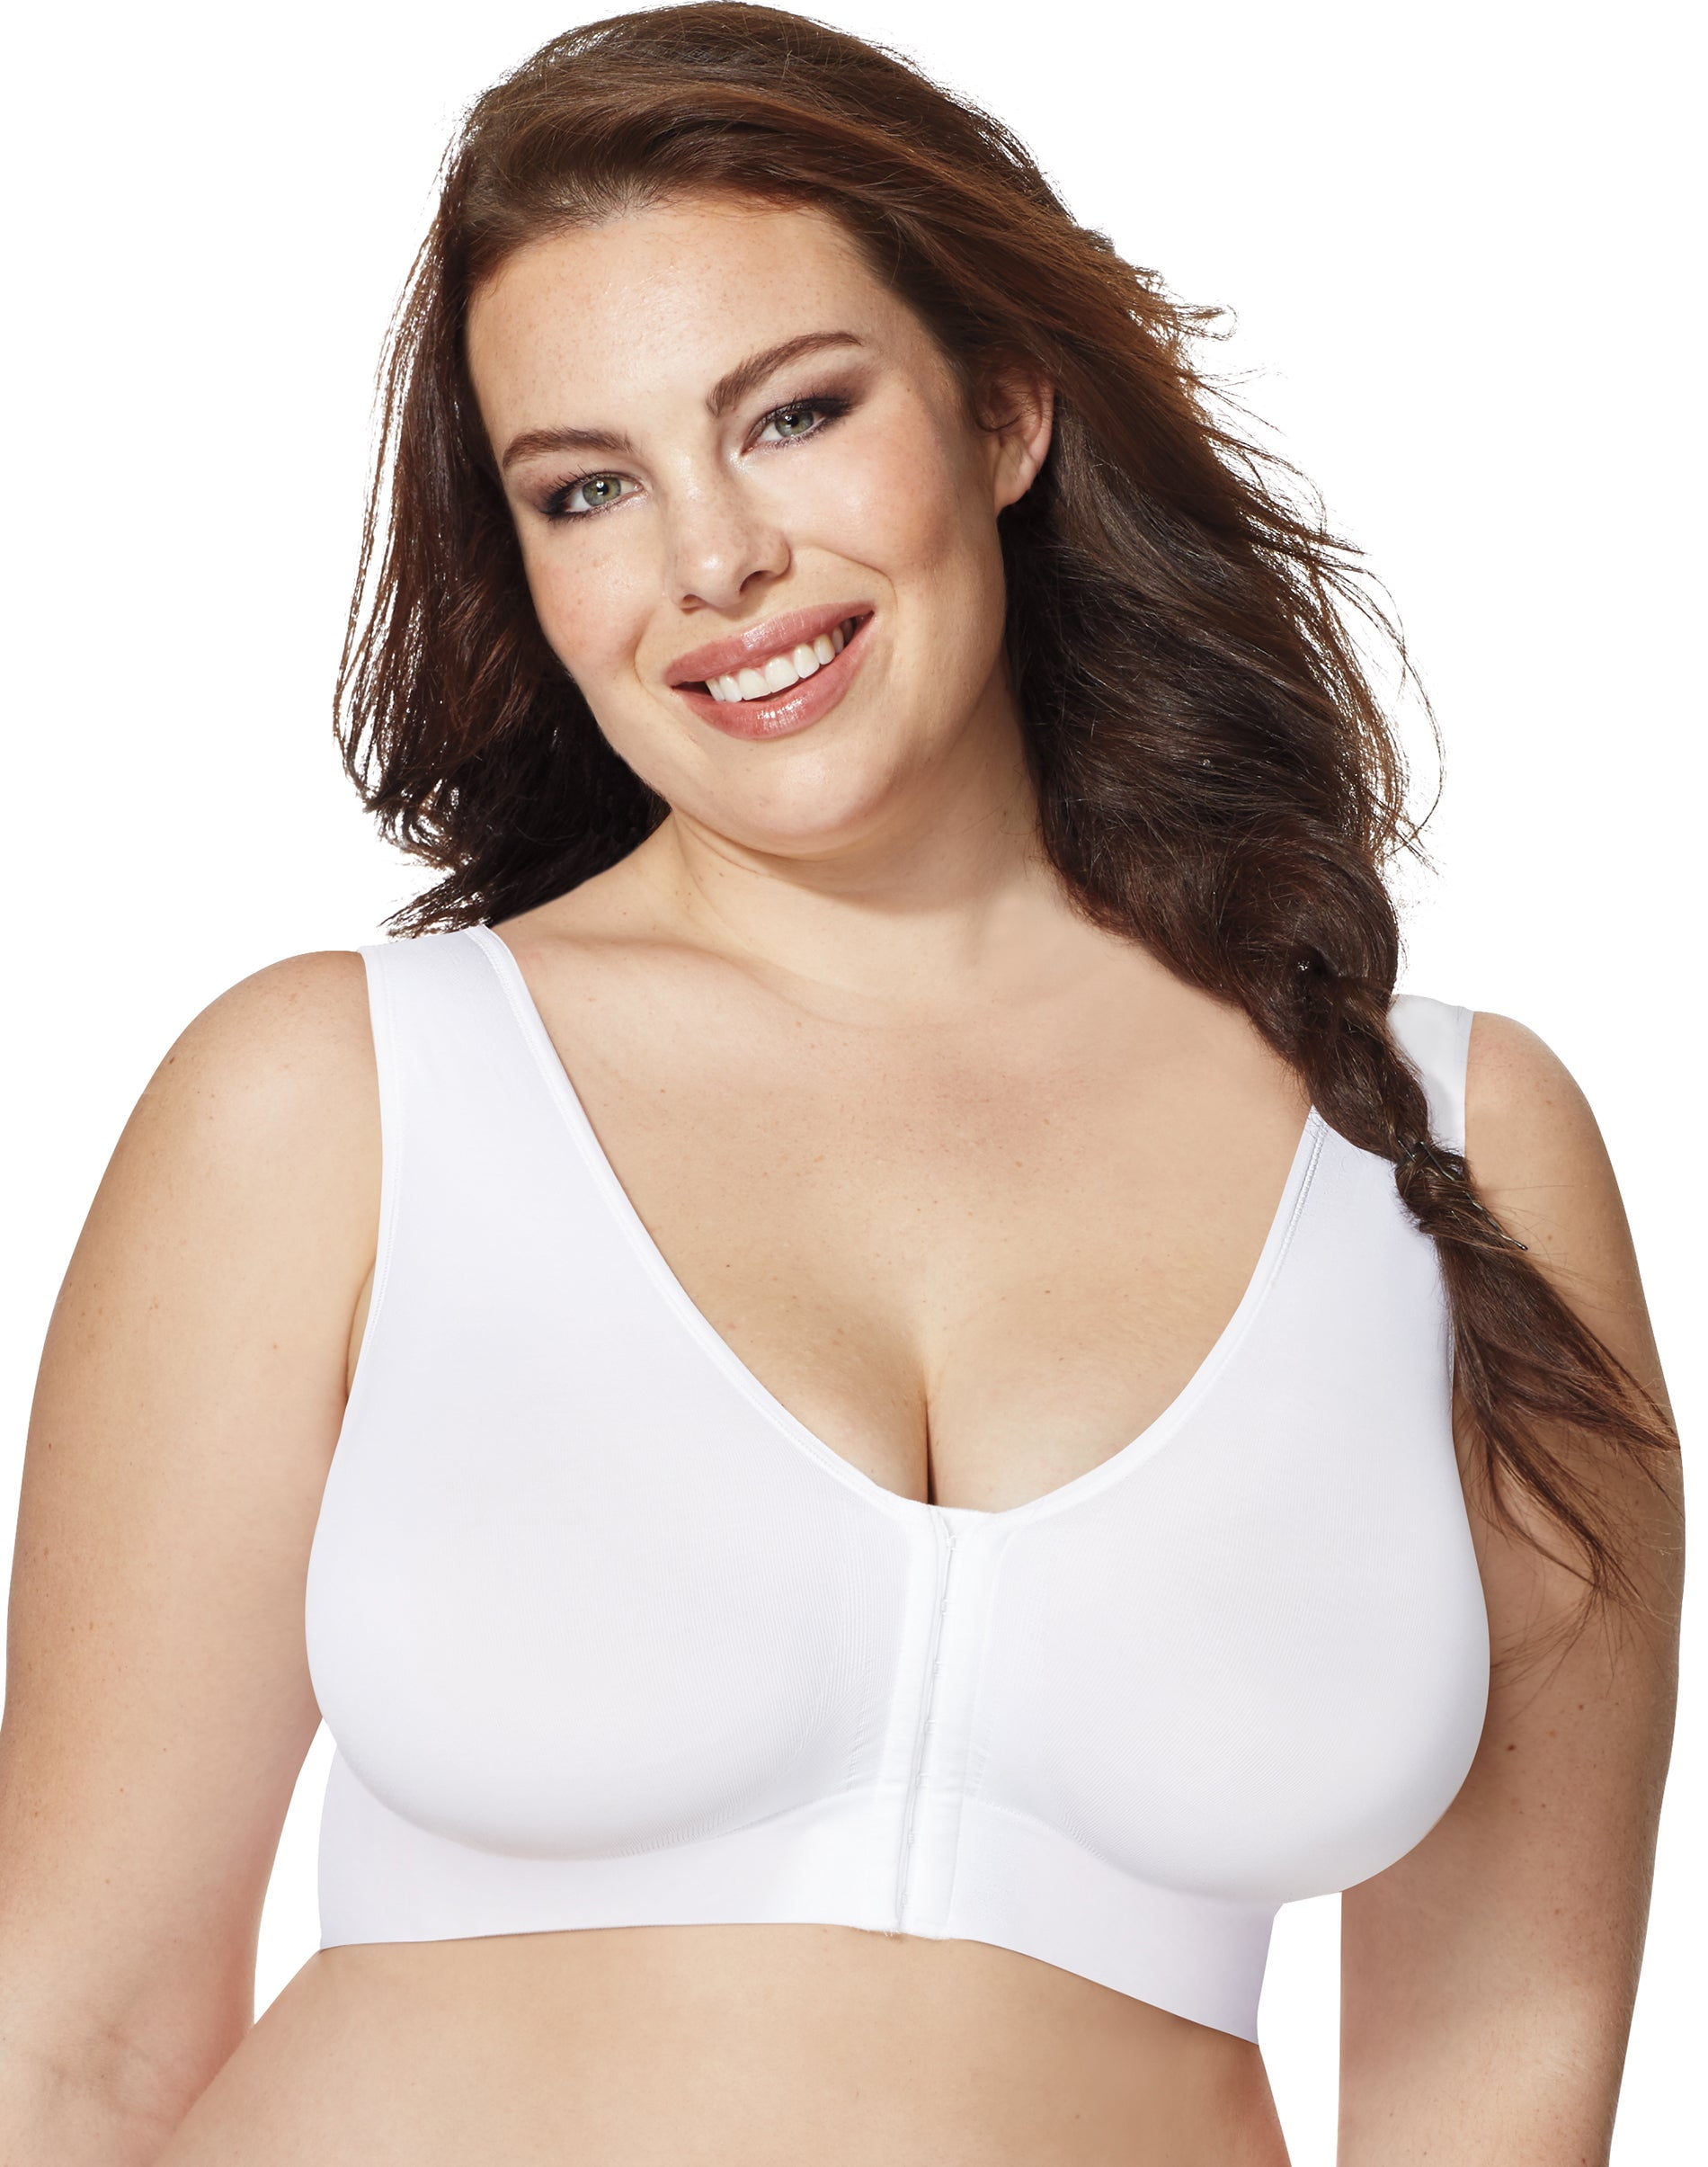 Hanes Just My Size Pure Comfort Front-Close Seamless Bra Sandshell 6X  Women's 